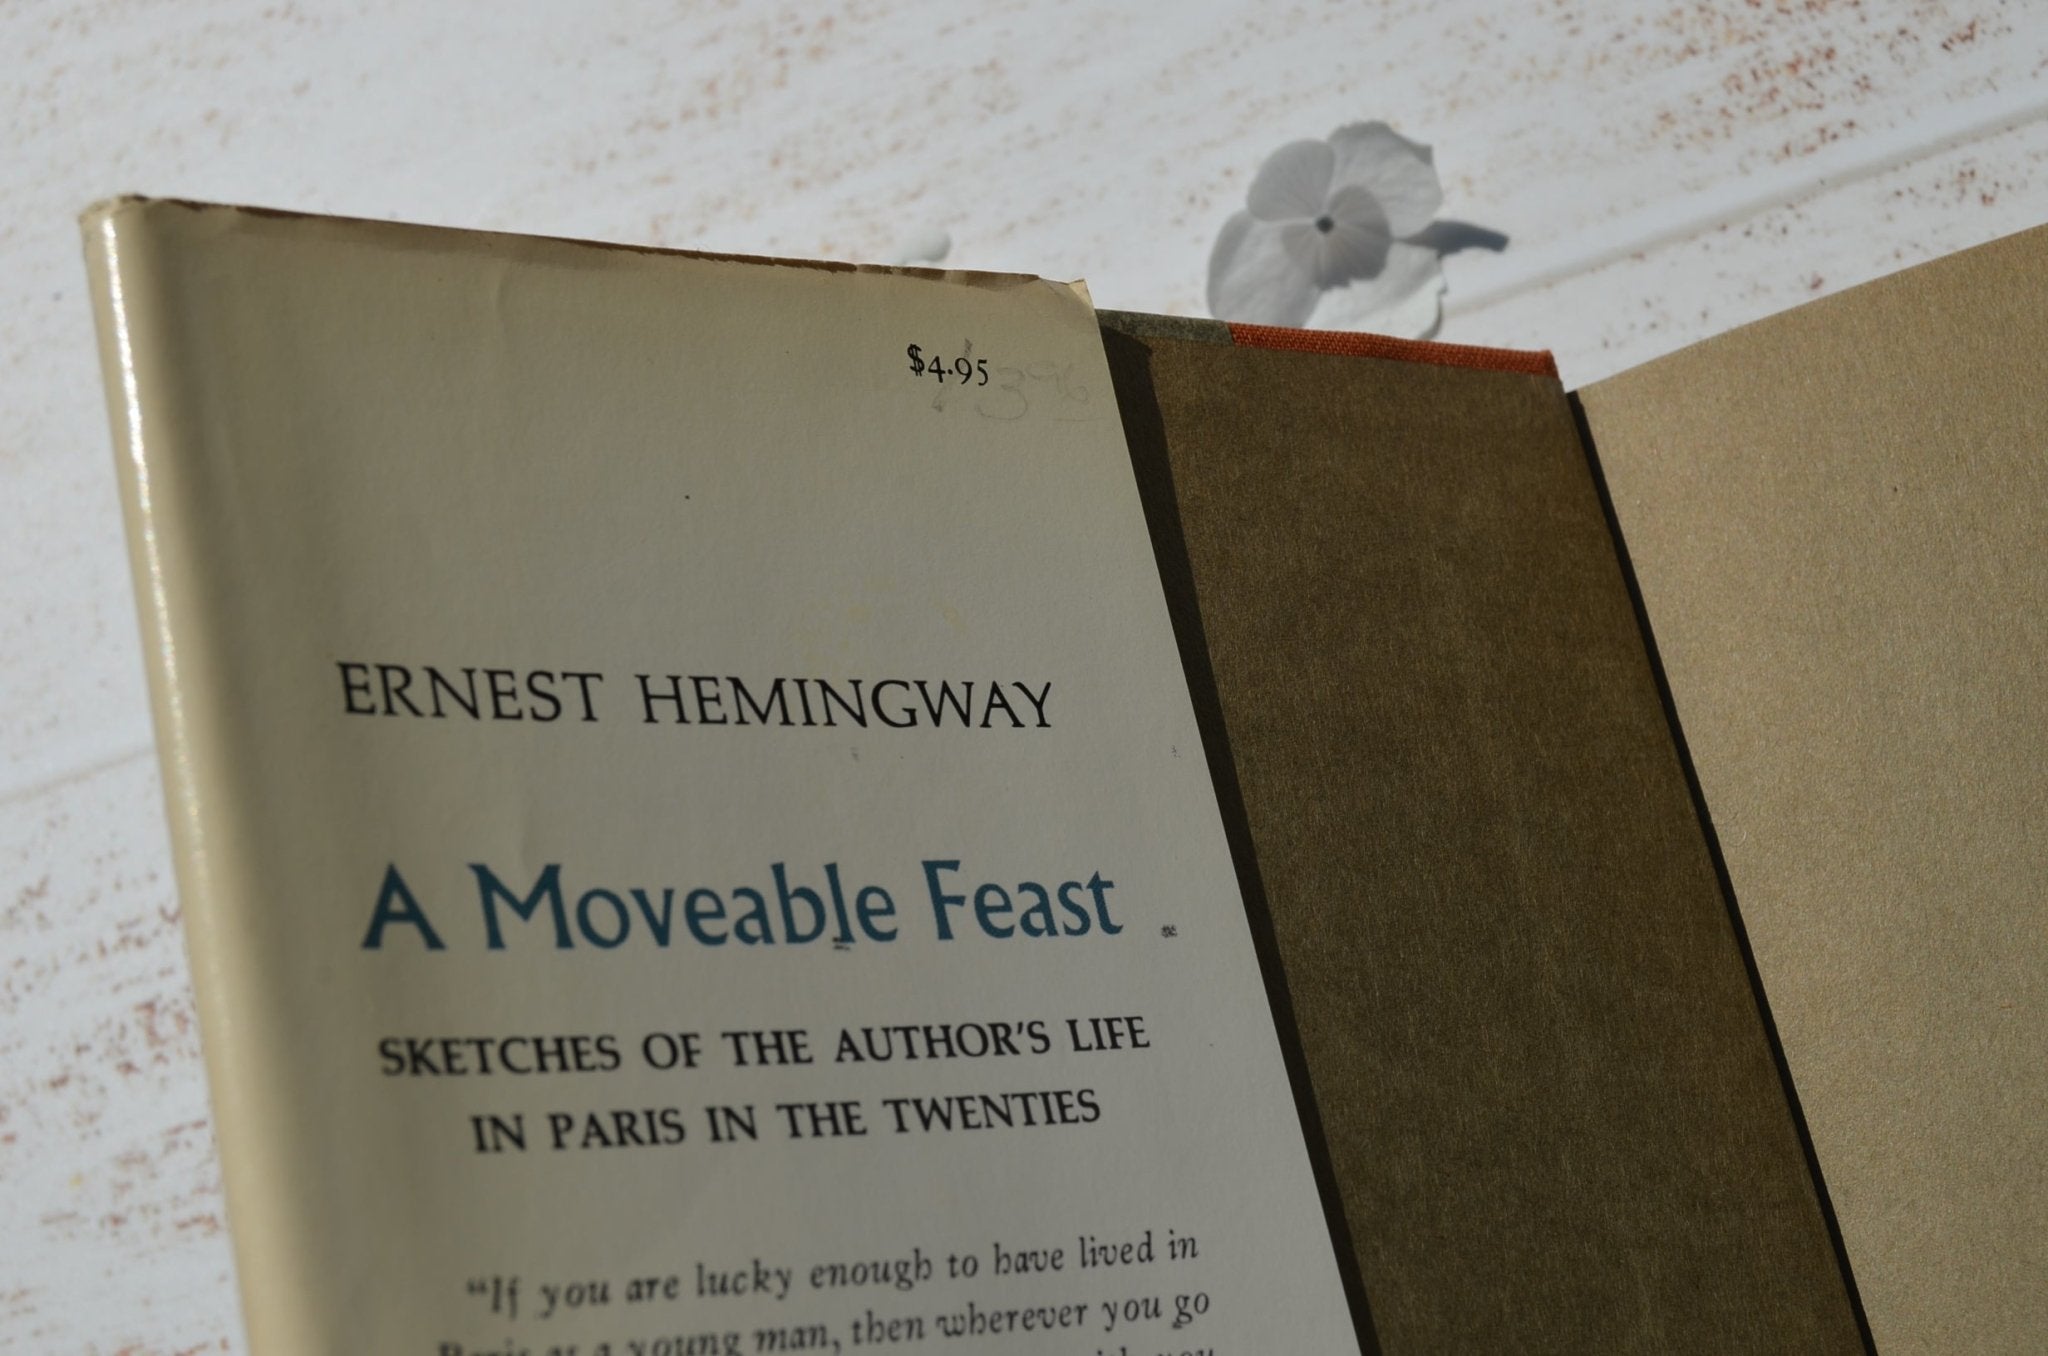 Second Printing – A Moveable Feast by Ernest Hemingway 1964 - Brookfield Books